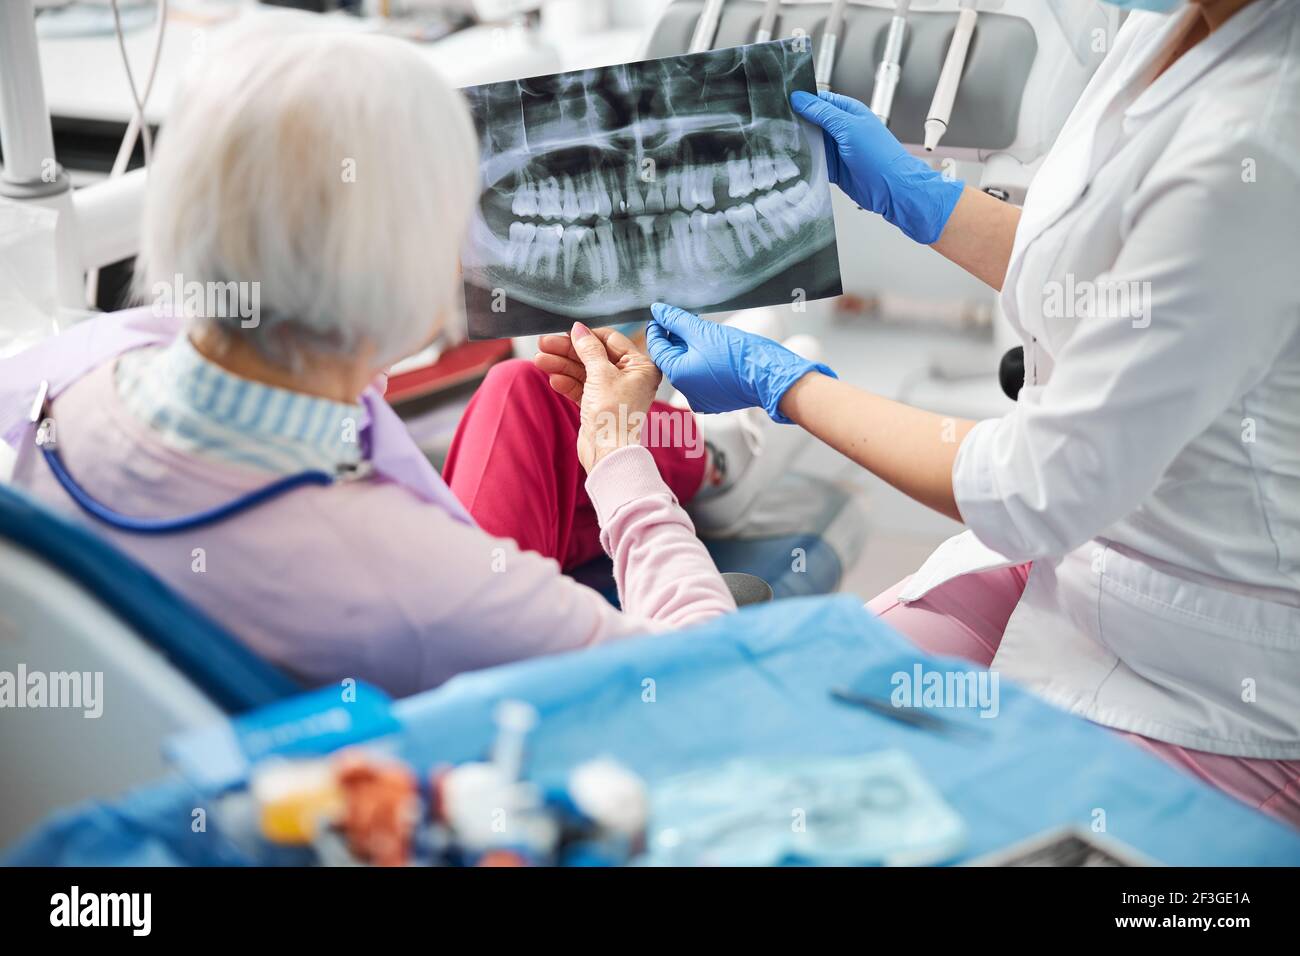 Medical specialist showing her client x-ray with teeth image Stock Photo